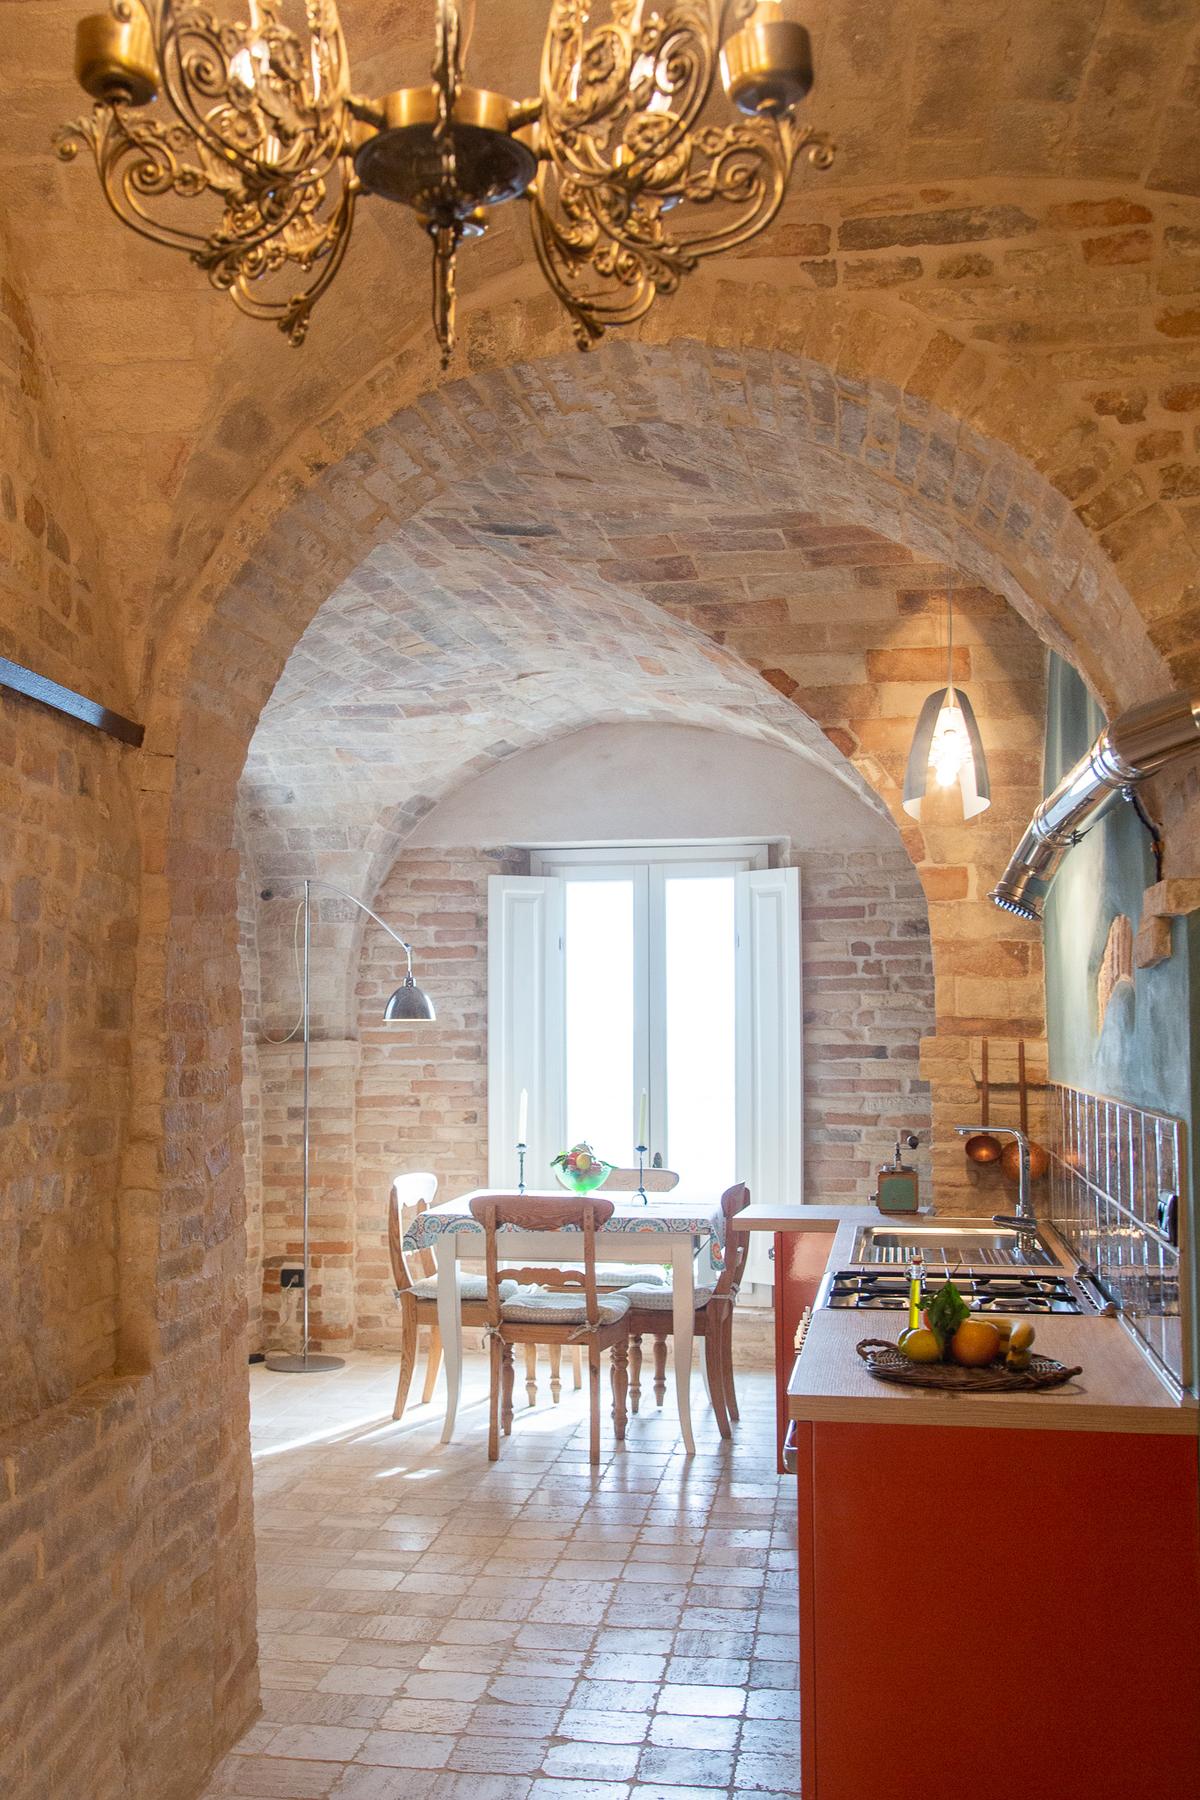 While the Palazzo Scarsini Apartment in Petritoli retains its 15th-century charm, the romantic one-bedroom is fully upgraded with modern appliances. (Courtesy of Appassionata)